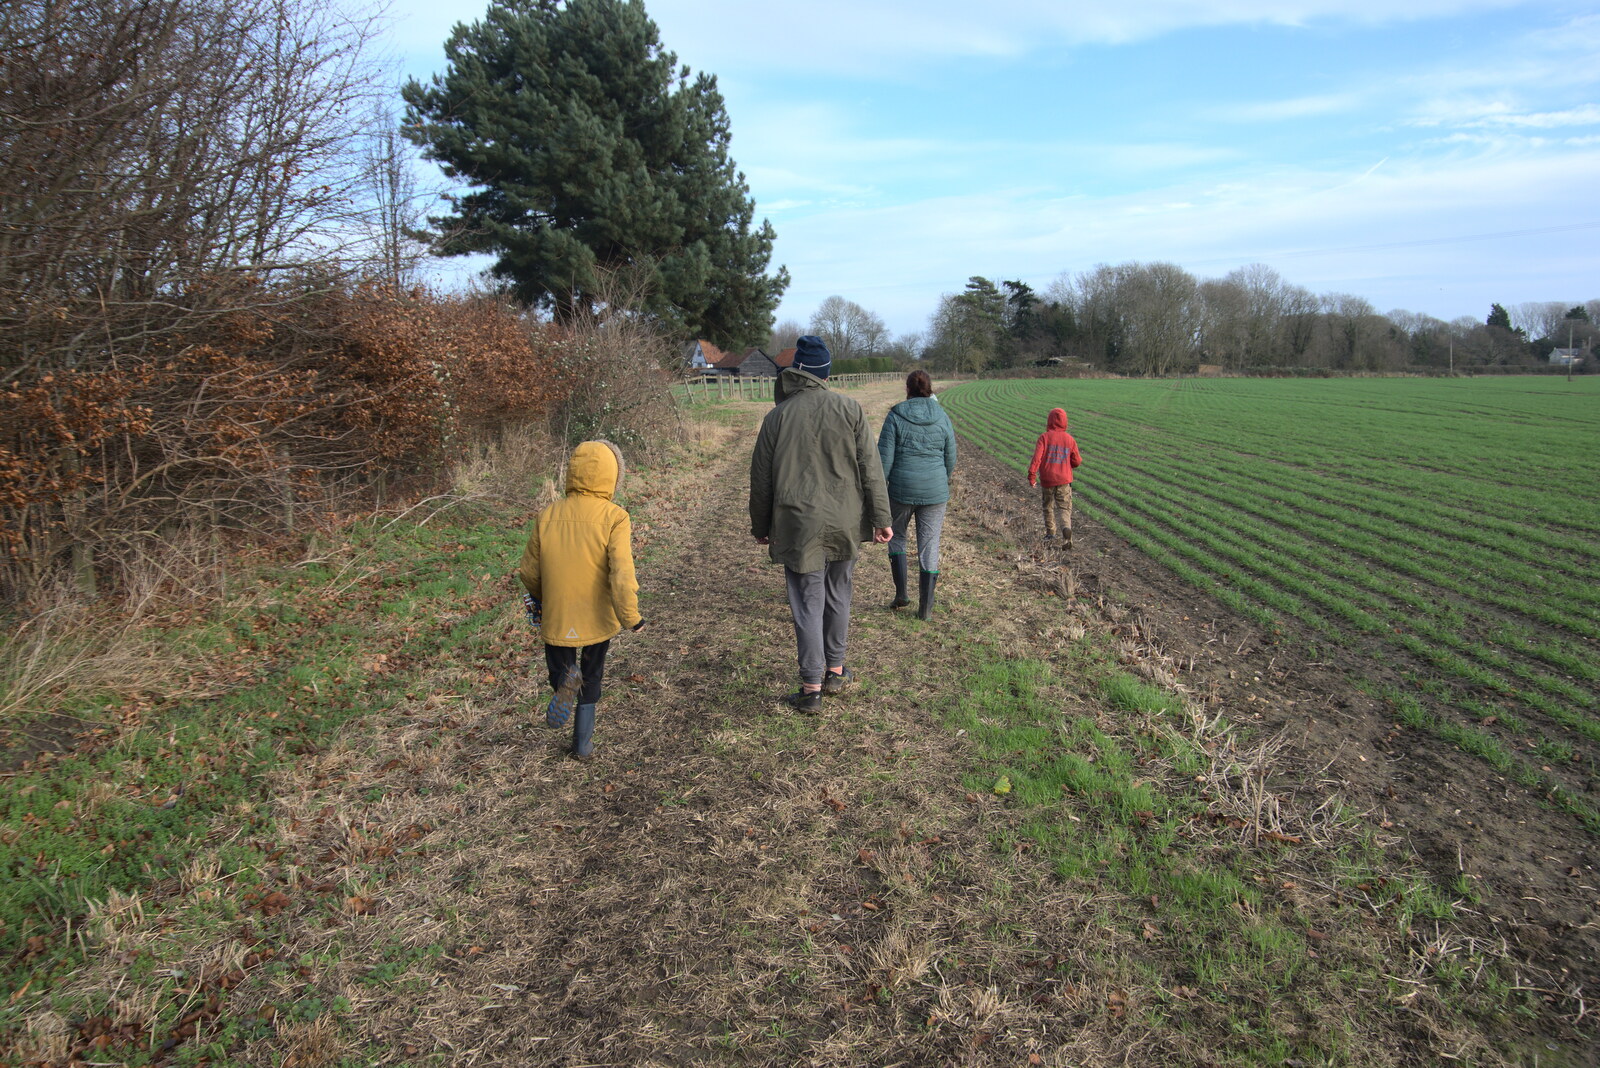 We're near Chinner's field from New Year's Day, Brome, Suffolk - 1st January 2022